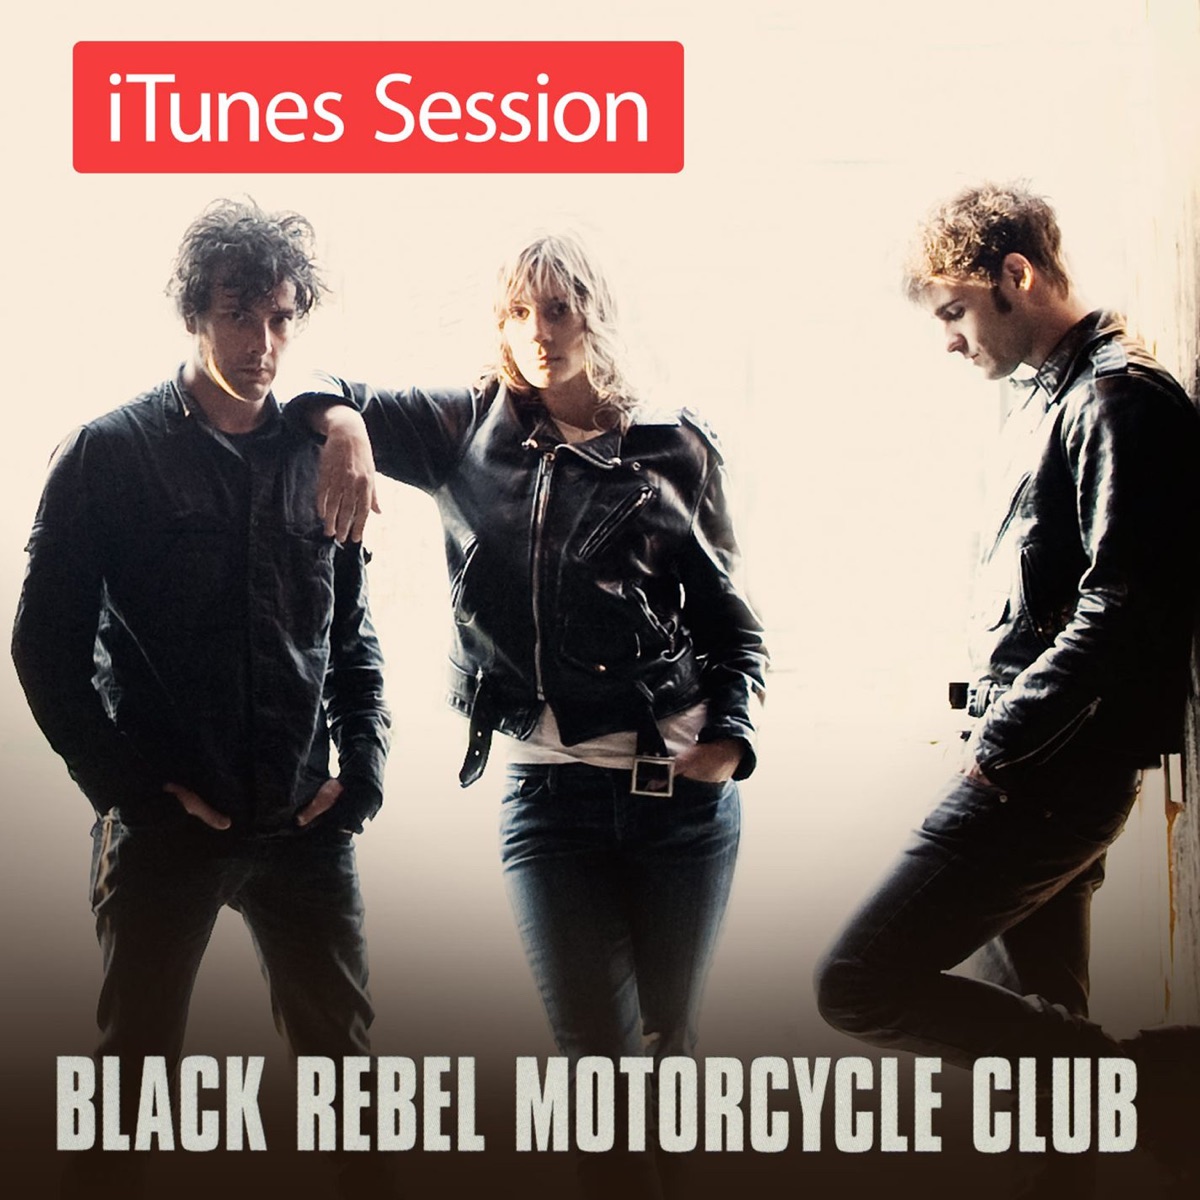 Beat the Devil's Tattoo by Black Rebel Motorcycle Club on Apple Music